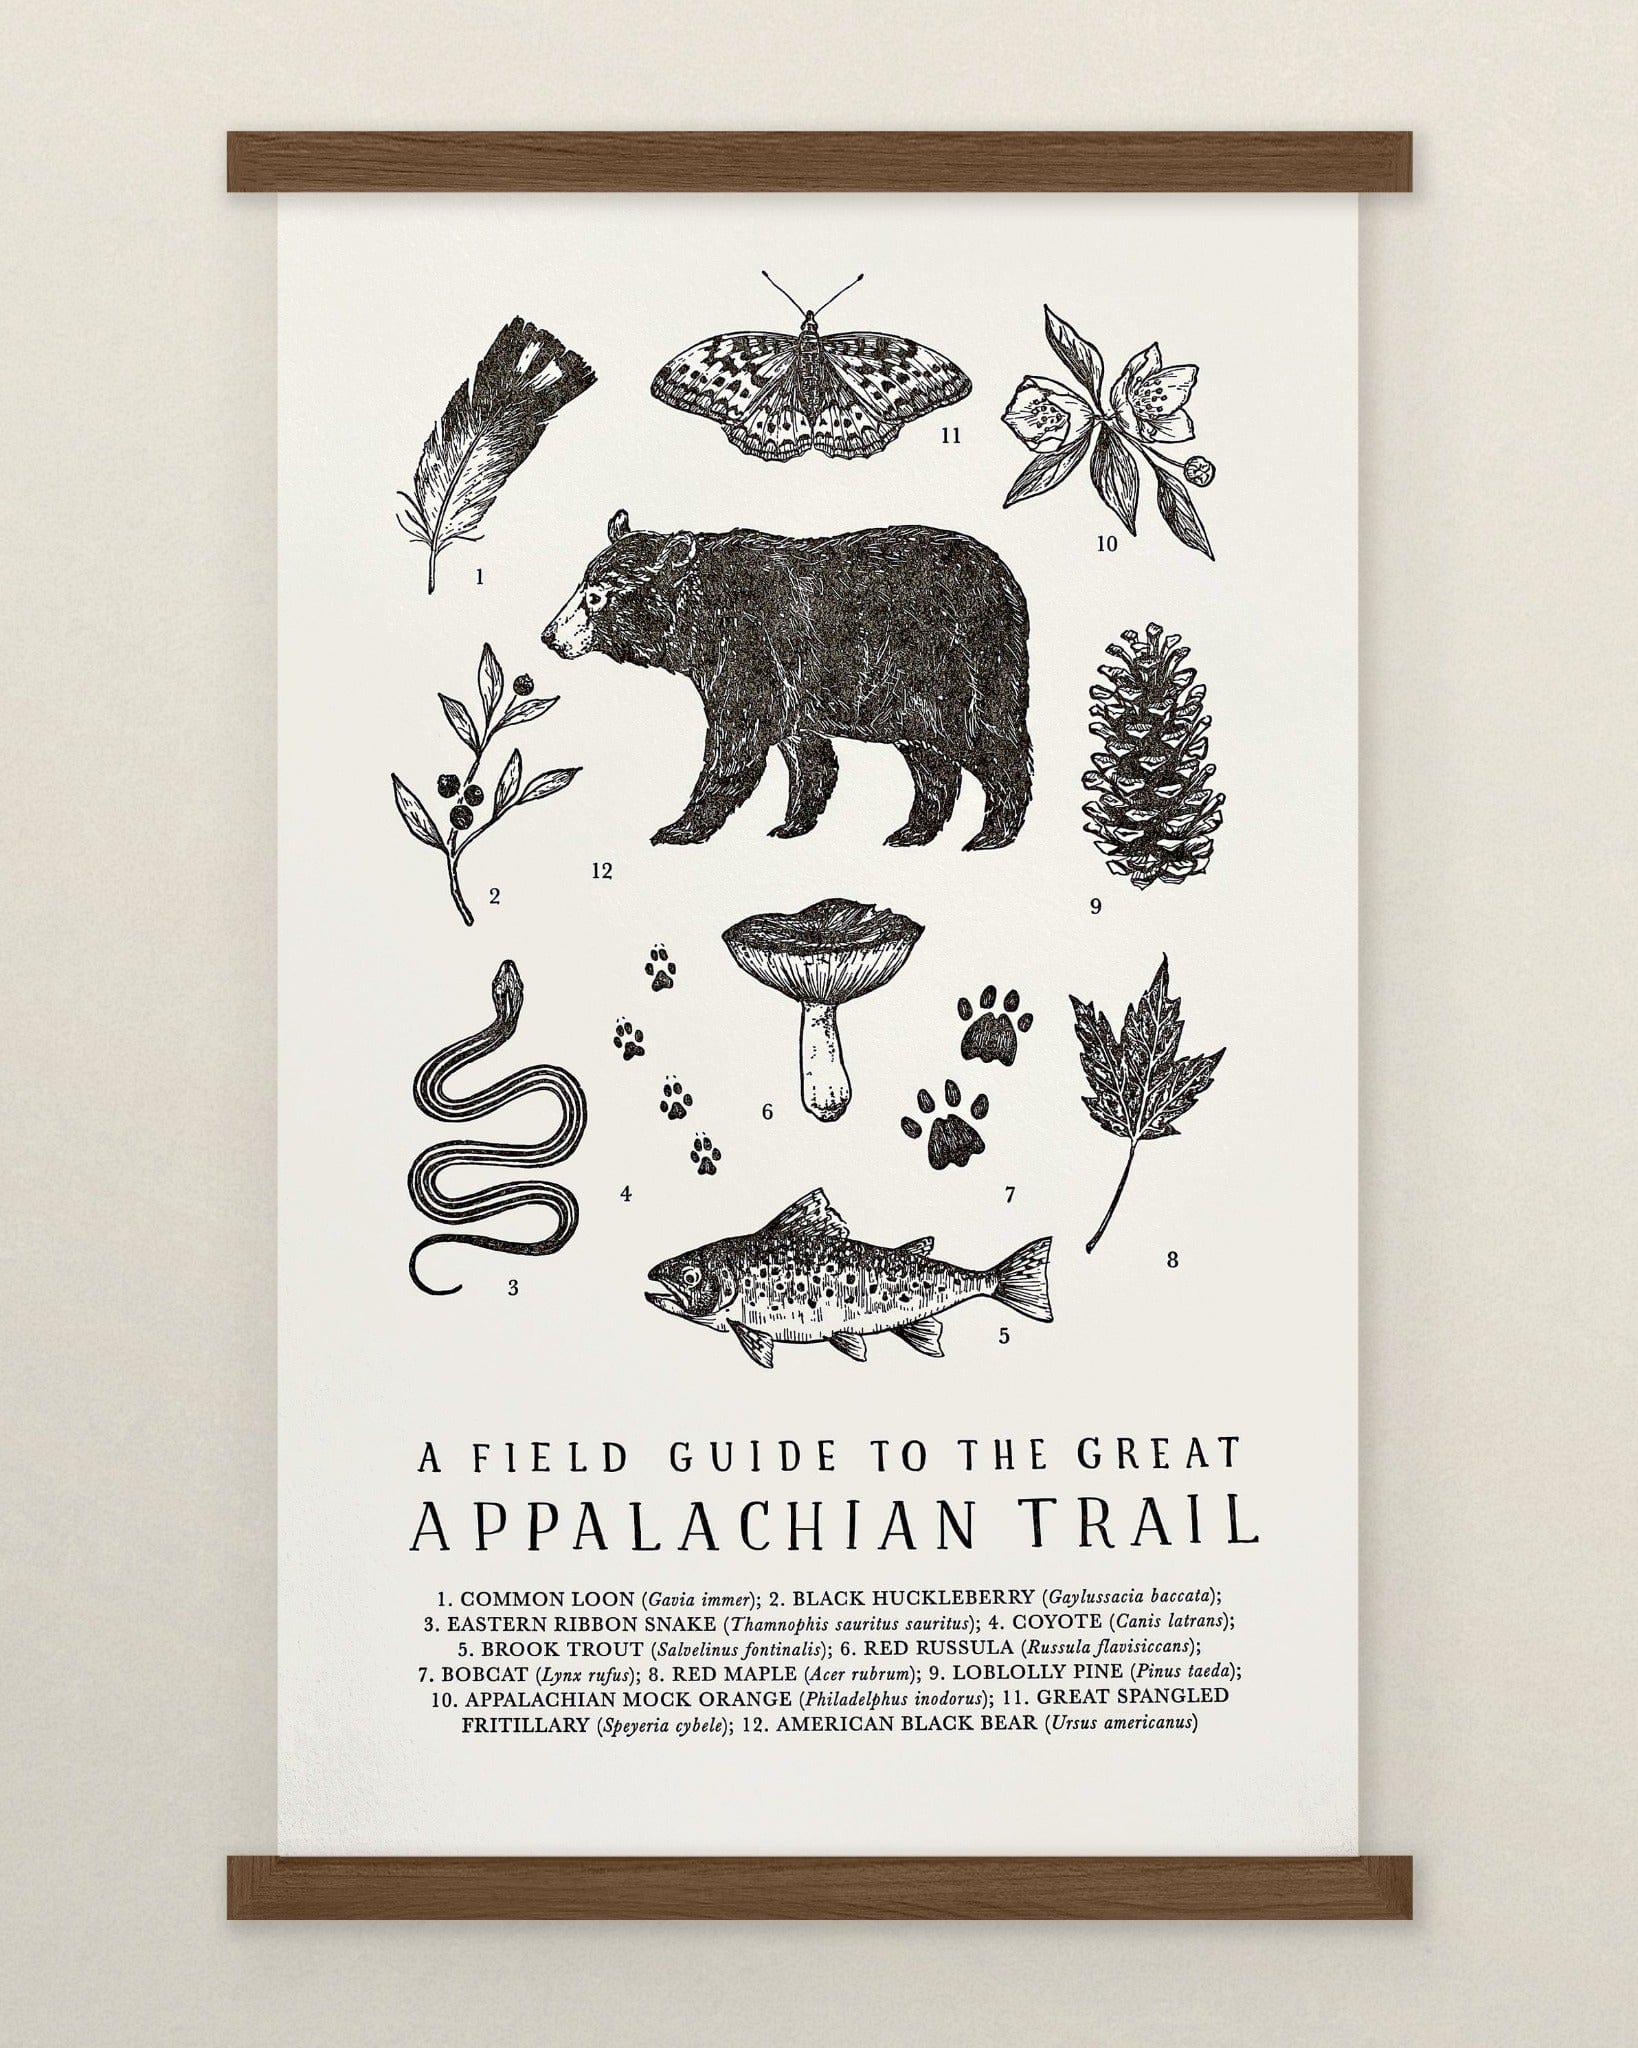 A field guide to the great Appalachian Trail poster becomes The Wild Wander's Appalachian Trail Field Guide Art Print.